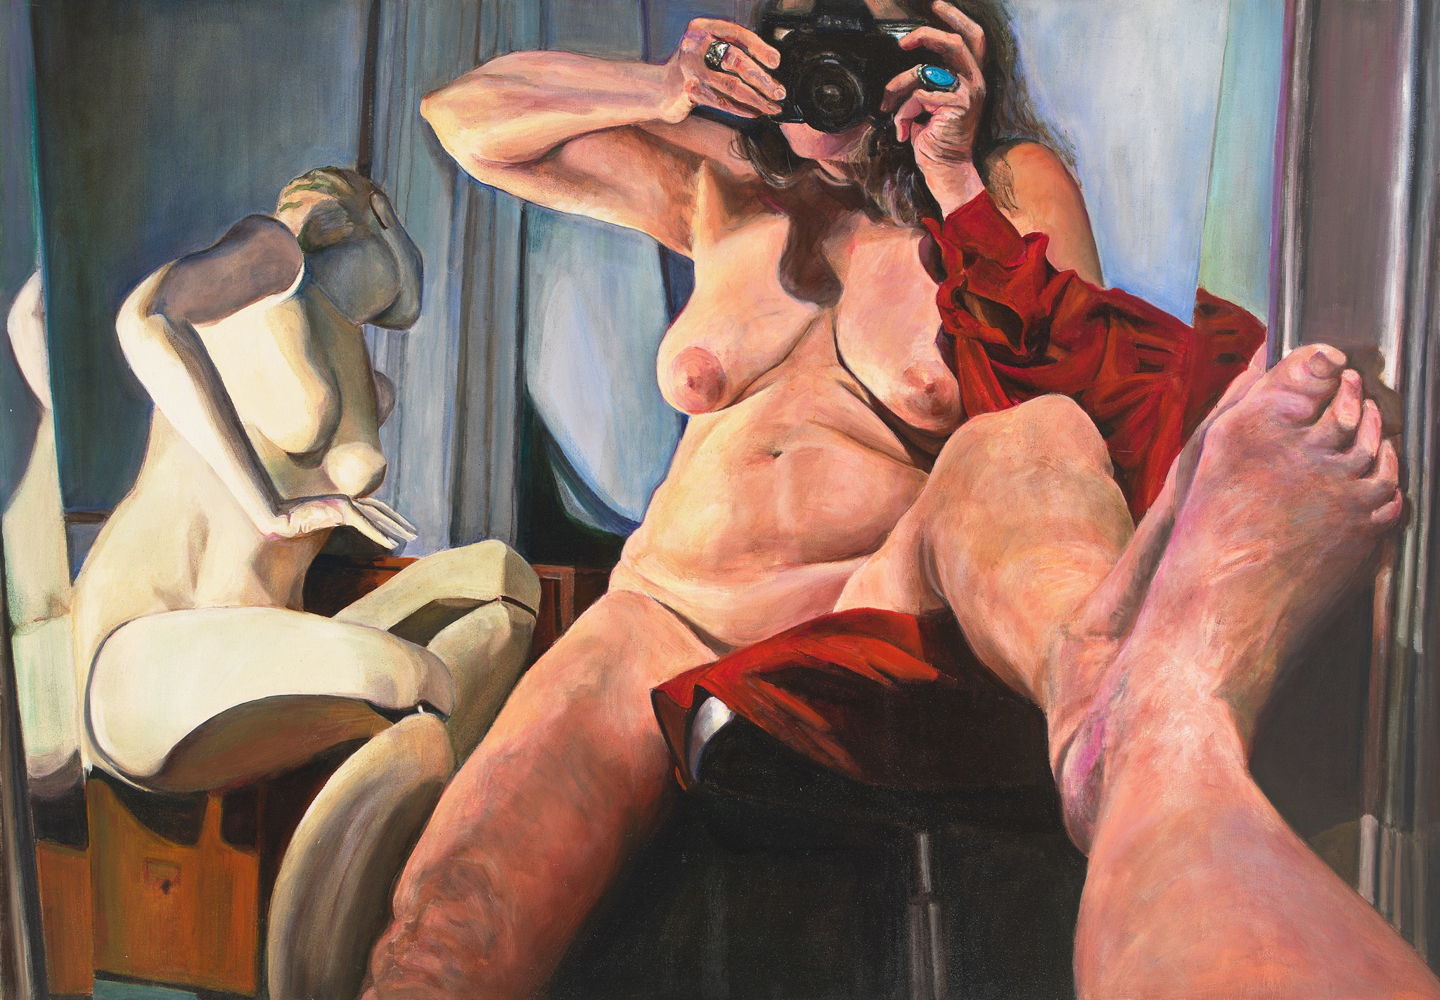 Joan Semmel, Baroque, 2002 oil on canvas 107 × 152.5 cm, 42 1⁄8 × 60 in. Photo credit: Jeffrey Sturges Courtesy of the Artist and Xavier Hufkens, Brussels